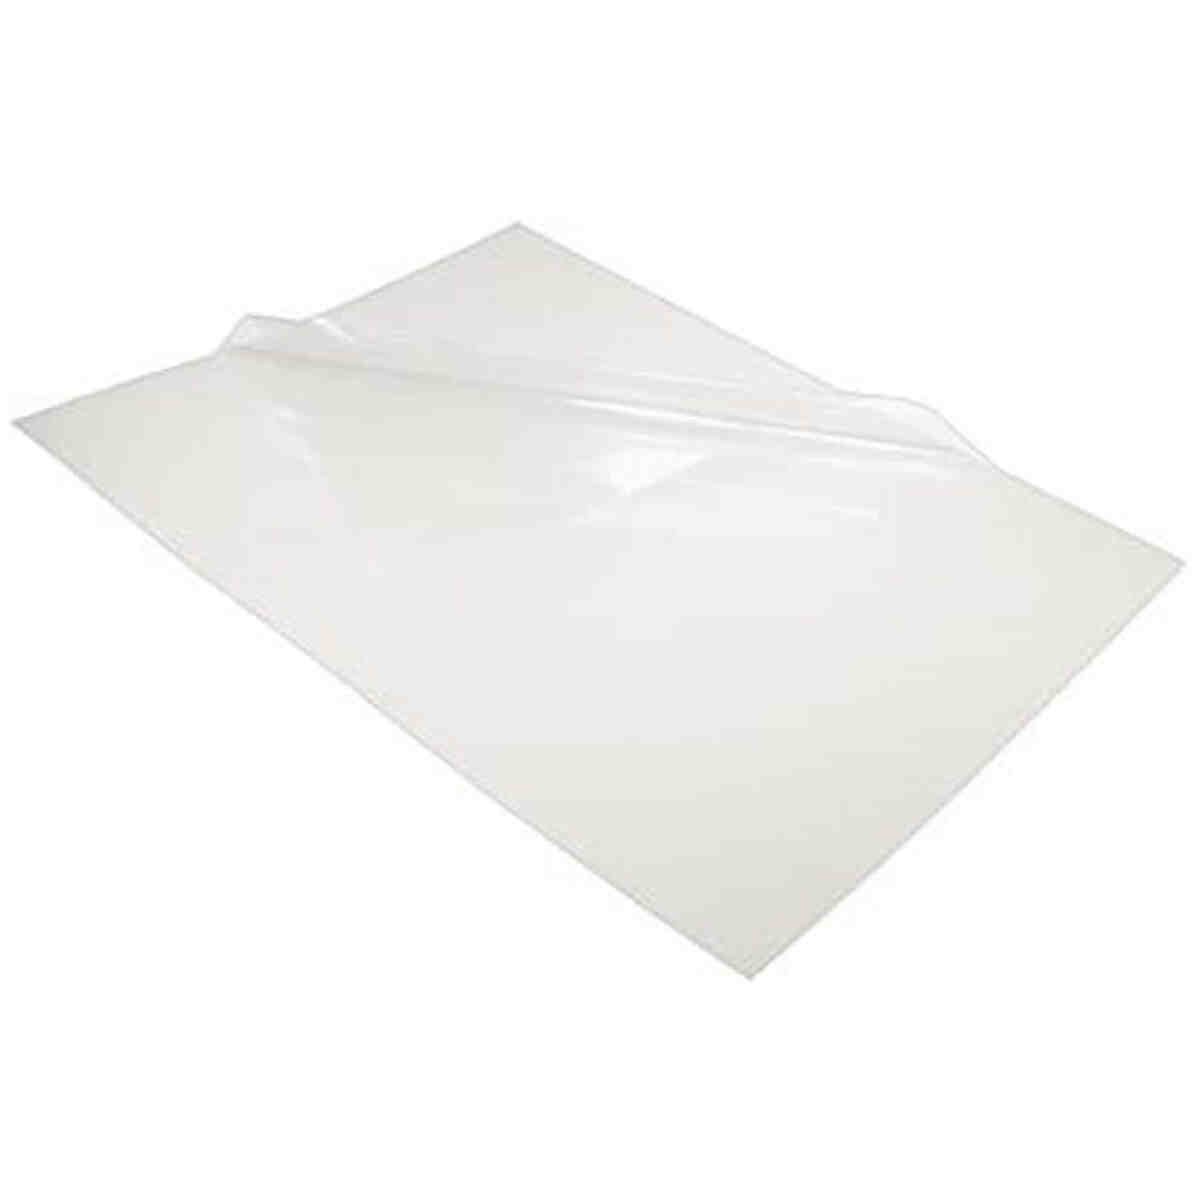 Direct To Film (DTF) Hot Peel Transfer Film 13"X 19" Sheets TOTAL INK SOLUTIONS®